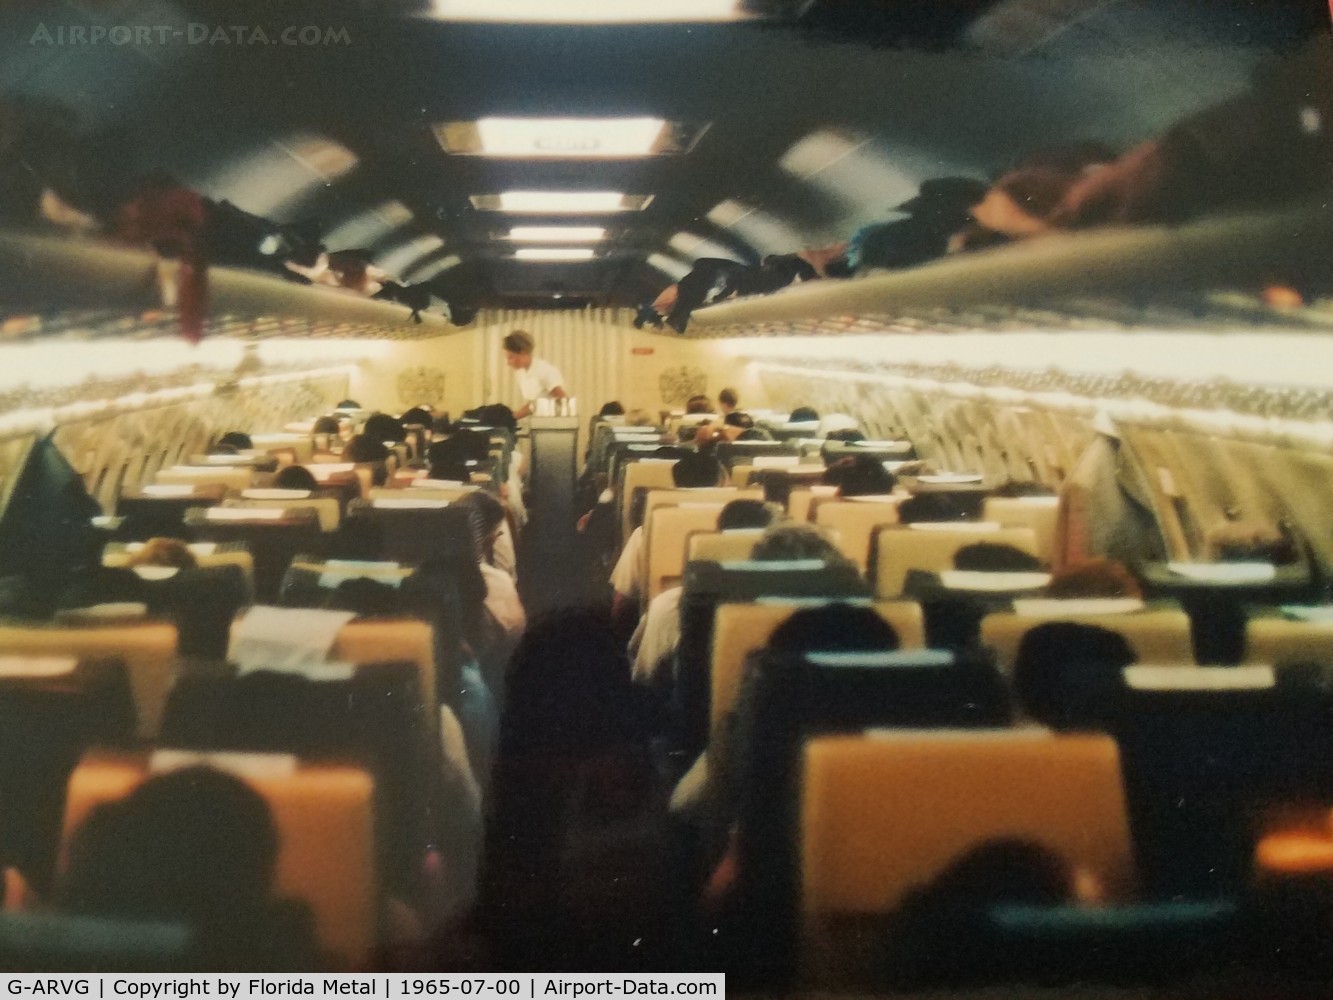 G-ARVG, 1963 Vickers VC10 Srs 1101 C/N 809, BOAC VC10 interior taken by my father sometime around 1965 in flight